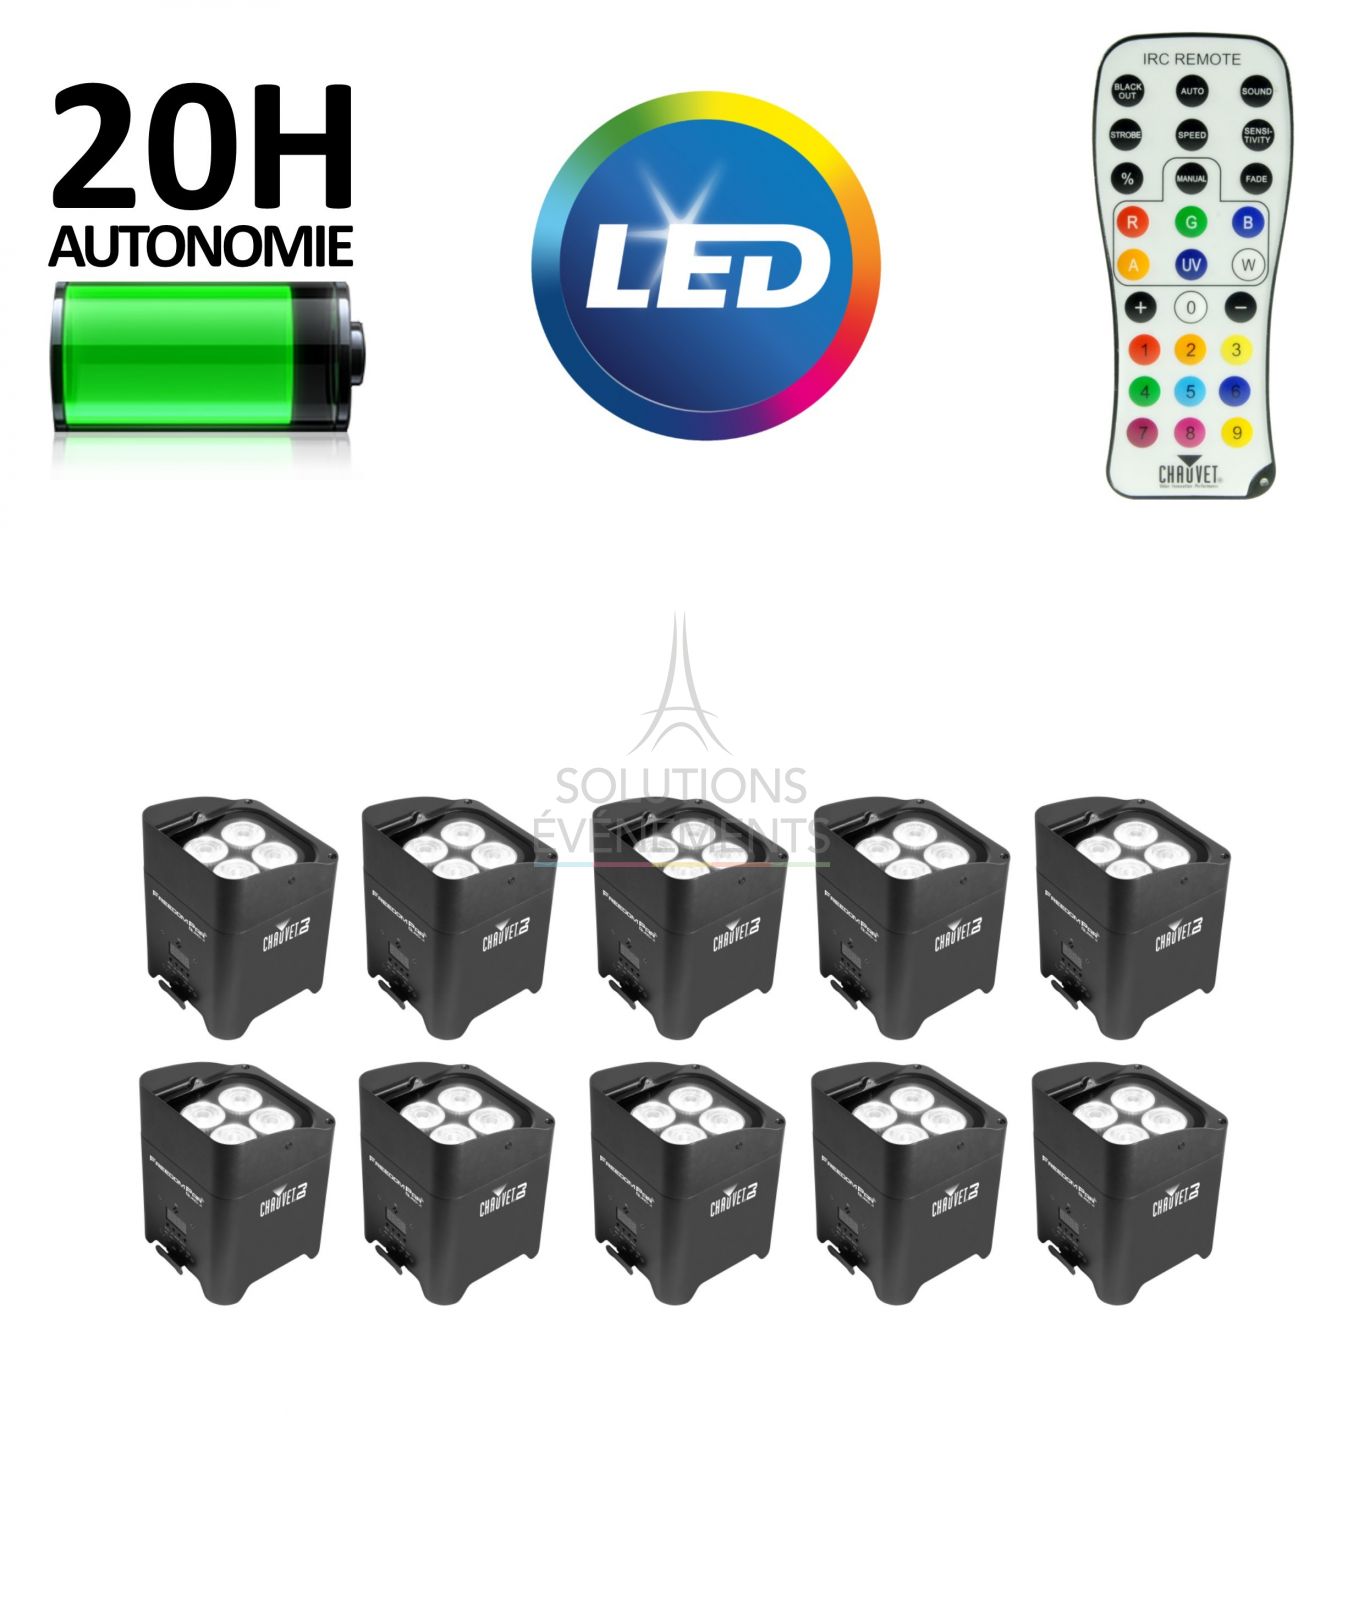 Rental of 10 battery-powered LED projectors